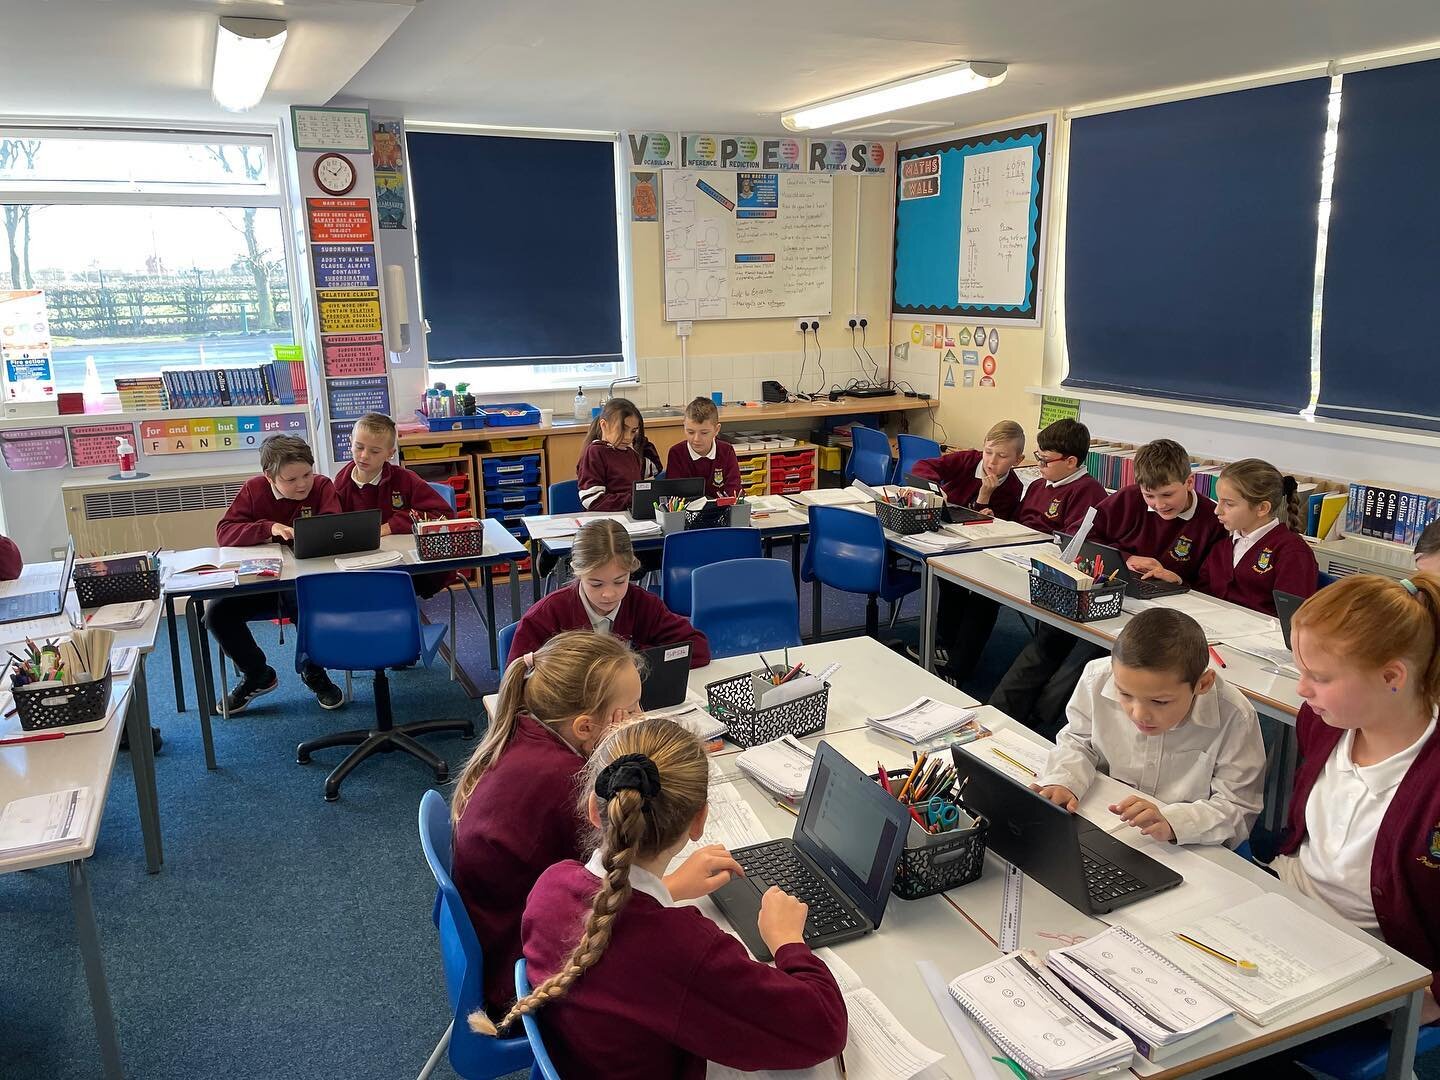 Skipsea Class 3 are developing their internet research skills. Applying their understanding of indexing from earlier this week, today they are discovering how to ensure they research efficiently AND avoid using incorrect information&hellip; a few adj